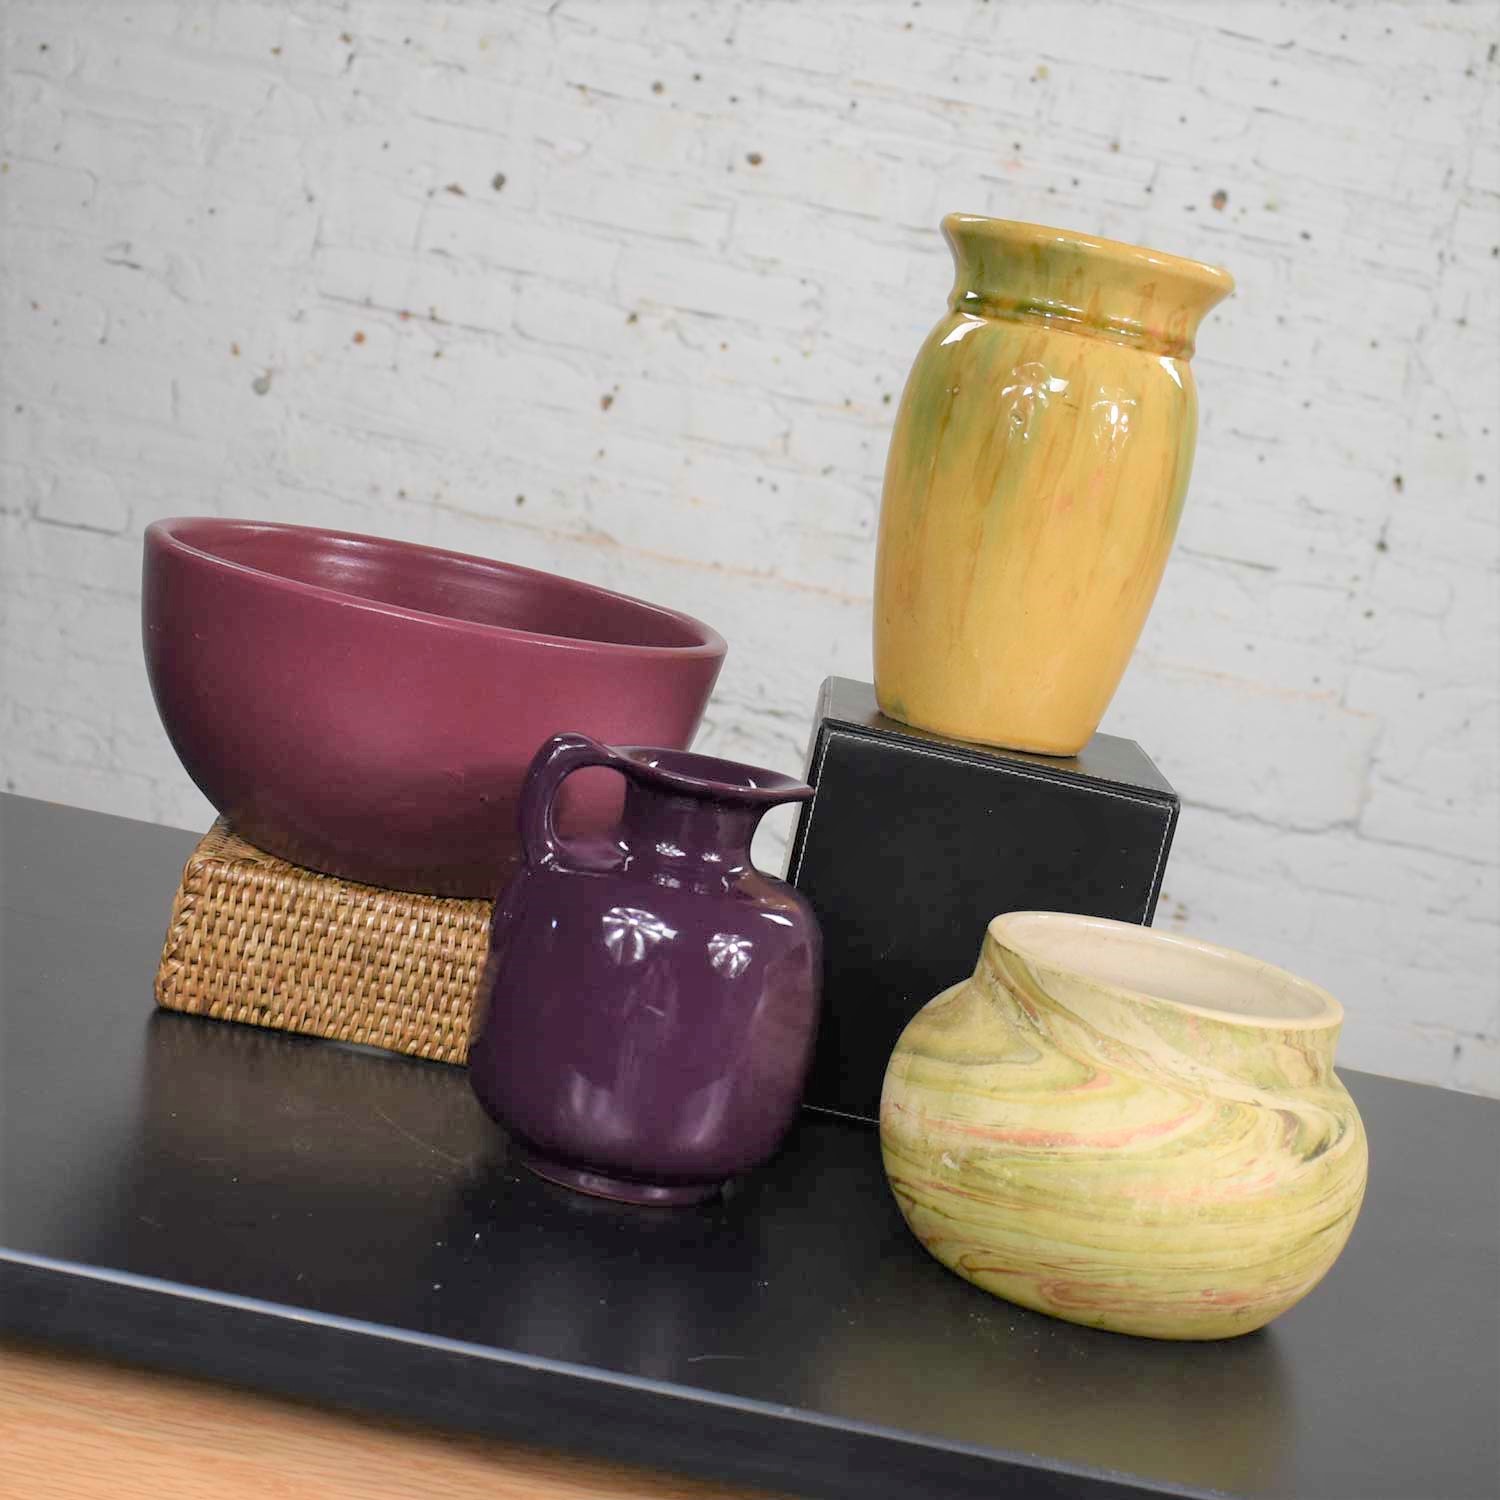 Collection of Four Vintage Pottery Pieces Aubergine Bowl Hull Yellow Vase Plum Frankoma Ewer Swirl Pot